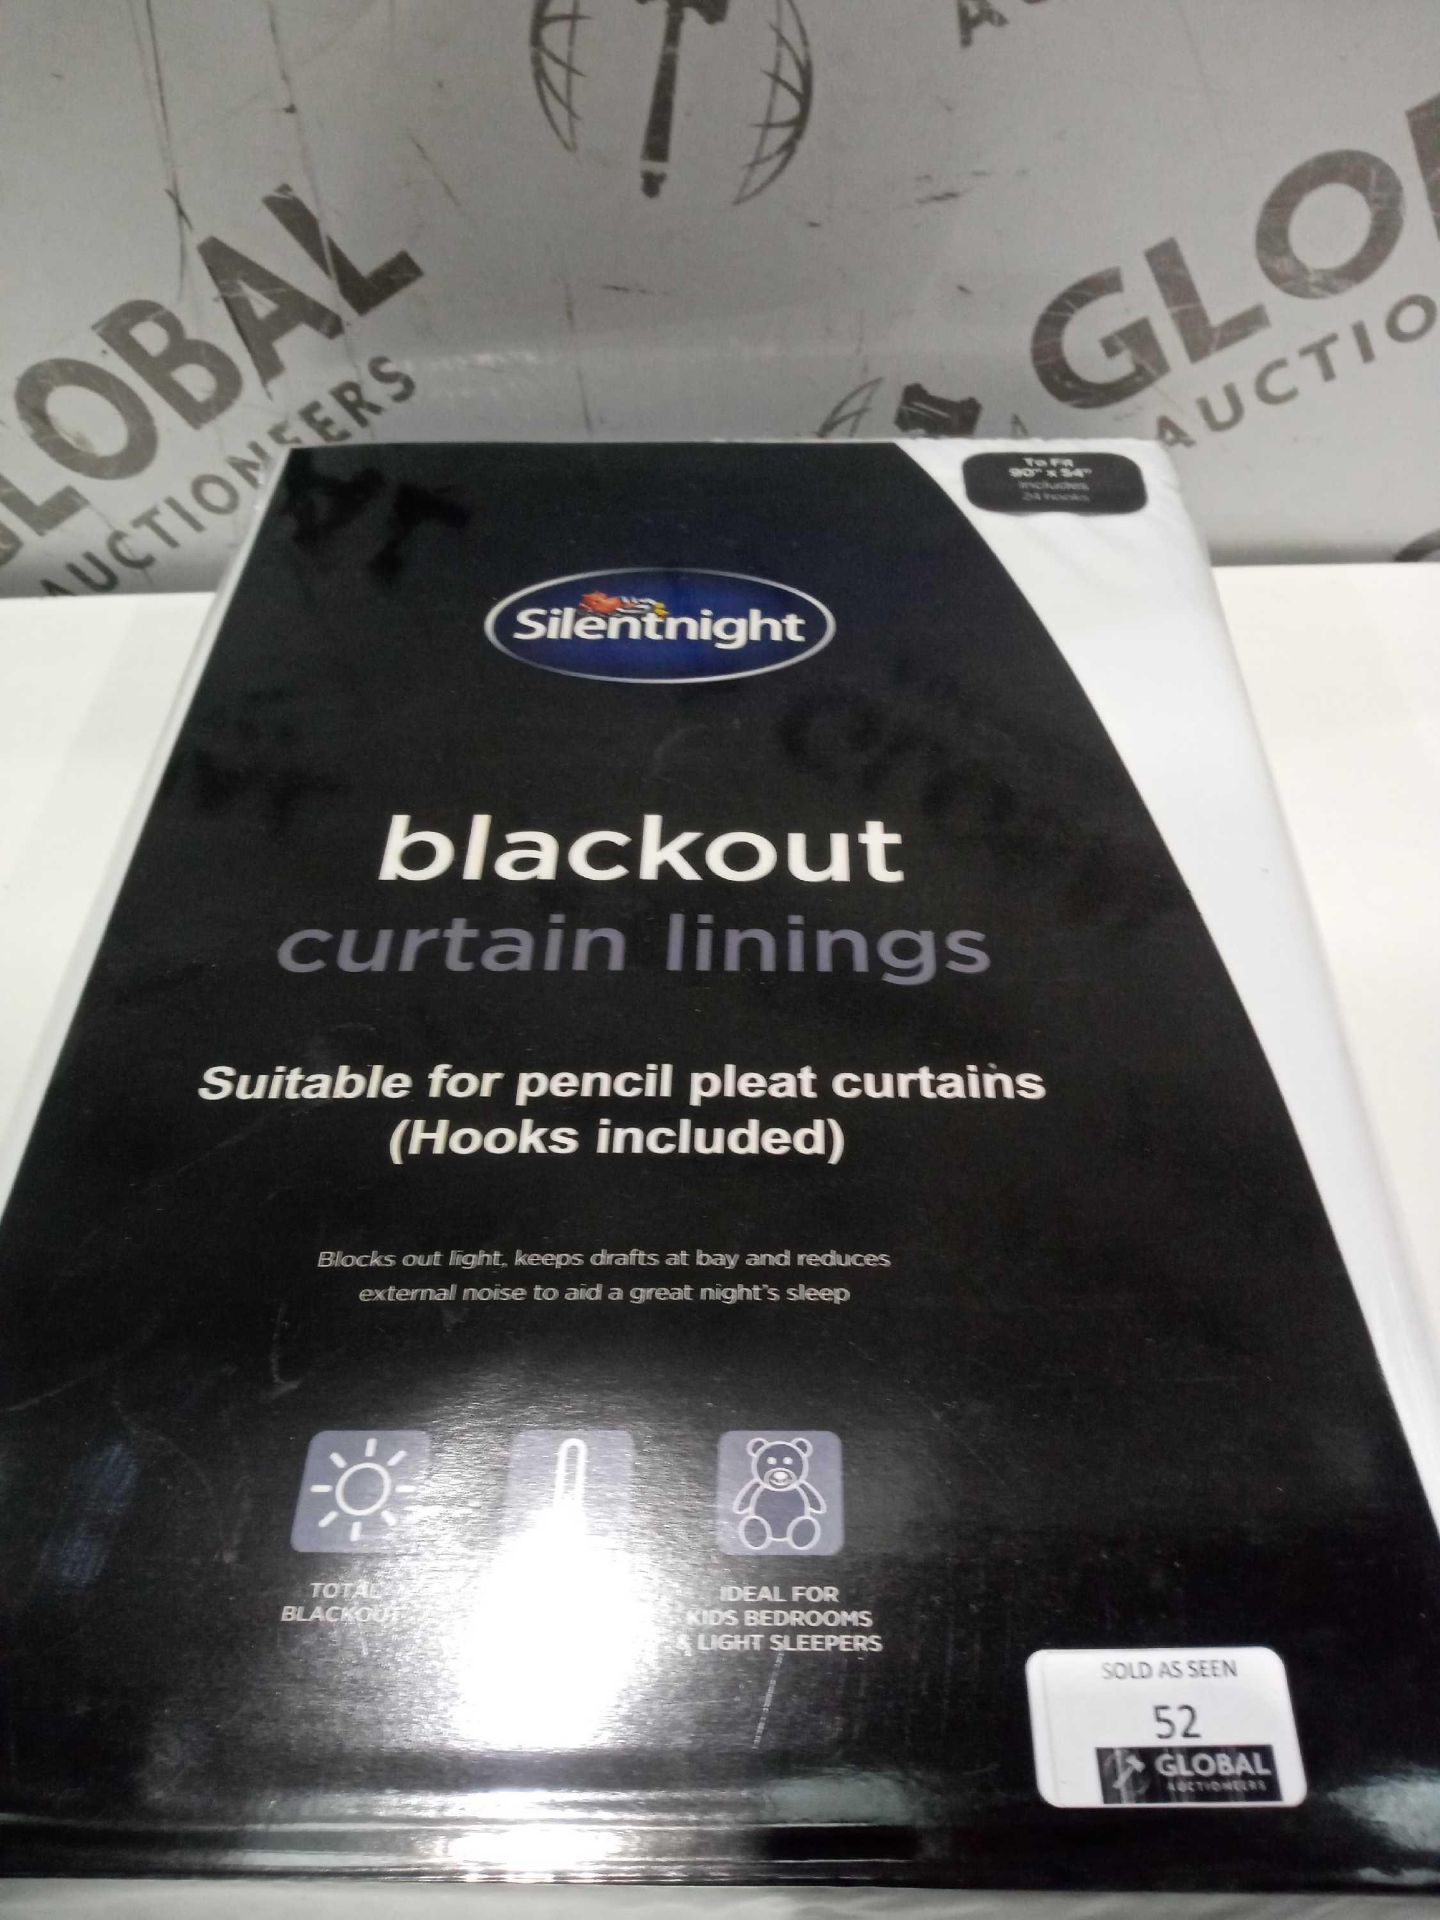 Rrp £120 Bagged Silent Night 90X54 Inch Blackout Curtain Linings